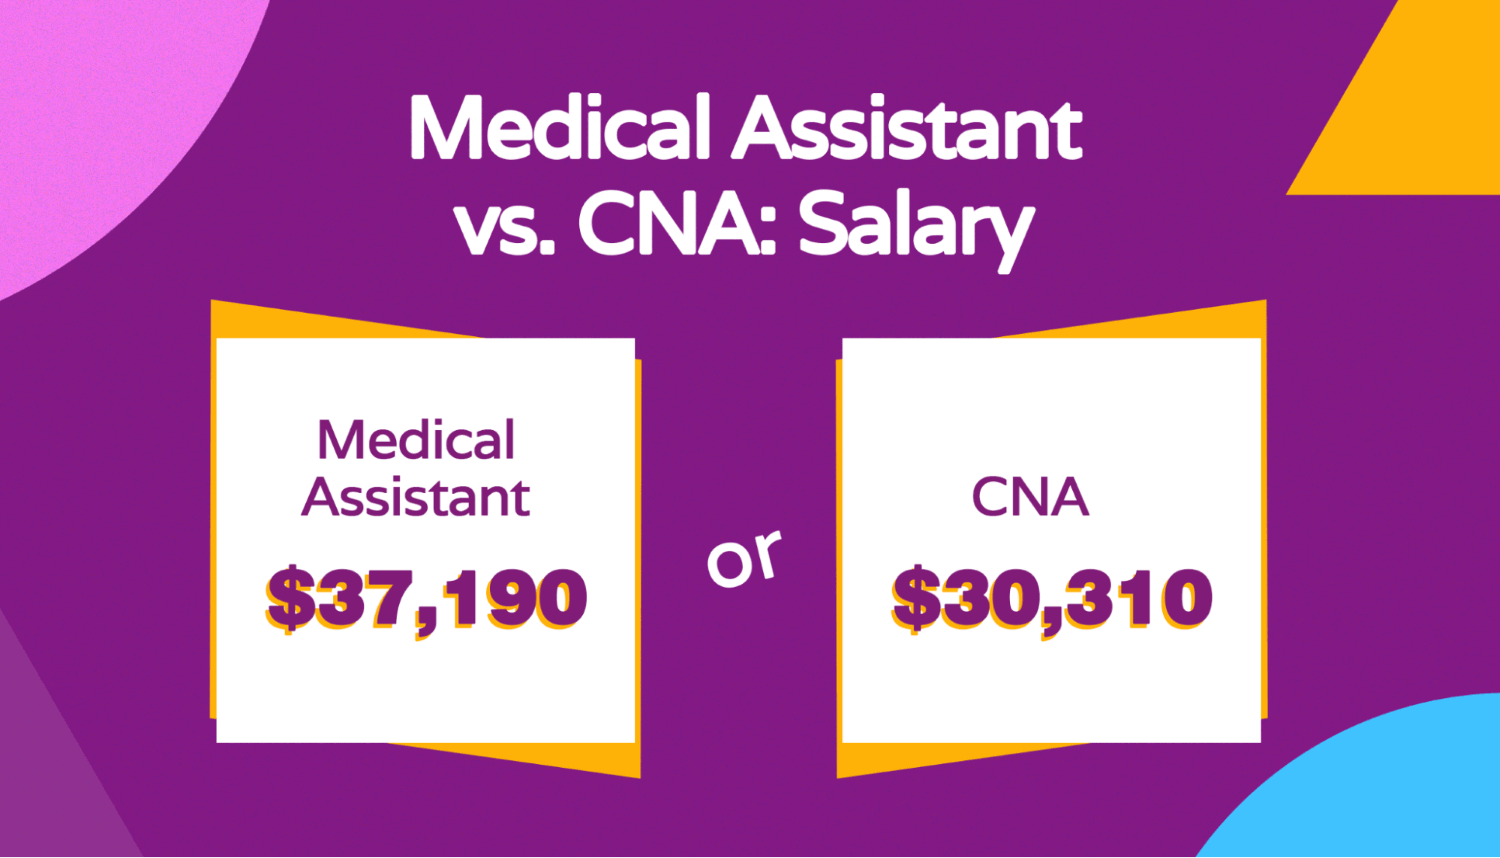 Differences in salary for medical assistants and CNAs